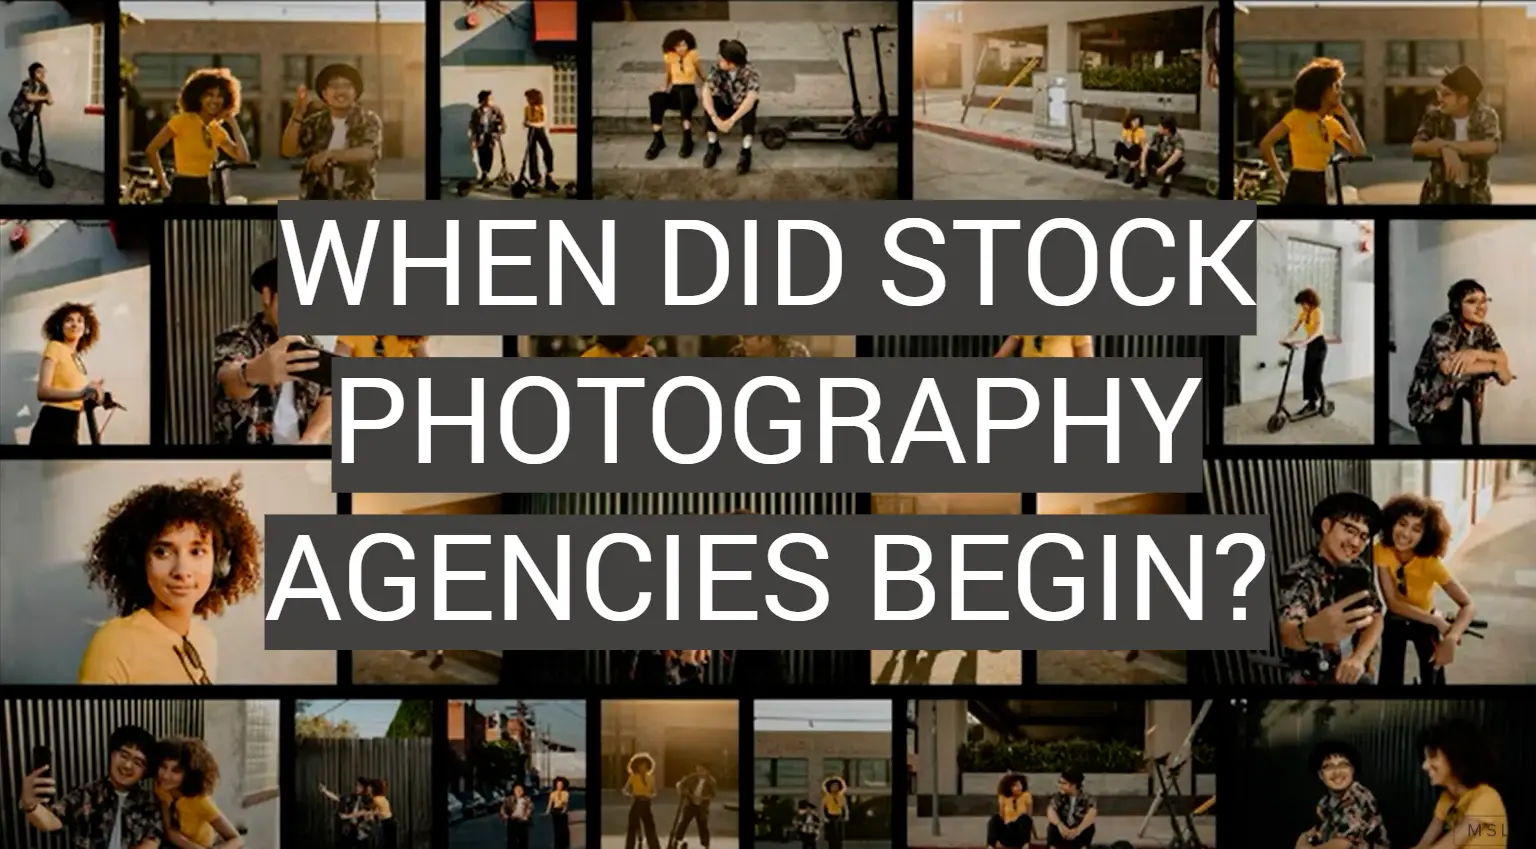 When Did Stock Photography Agencies Begin?